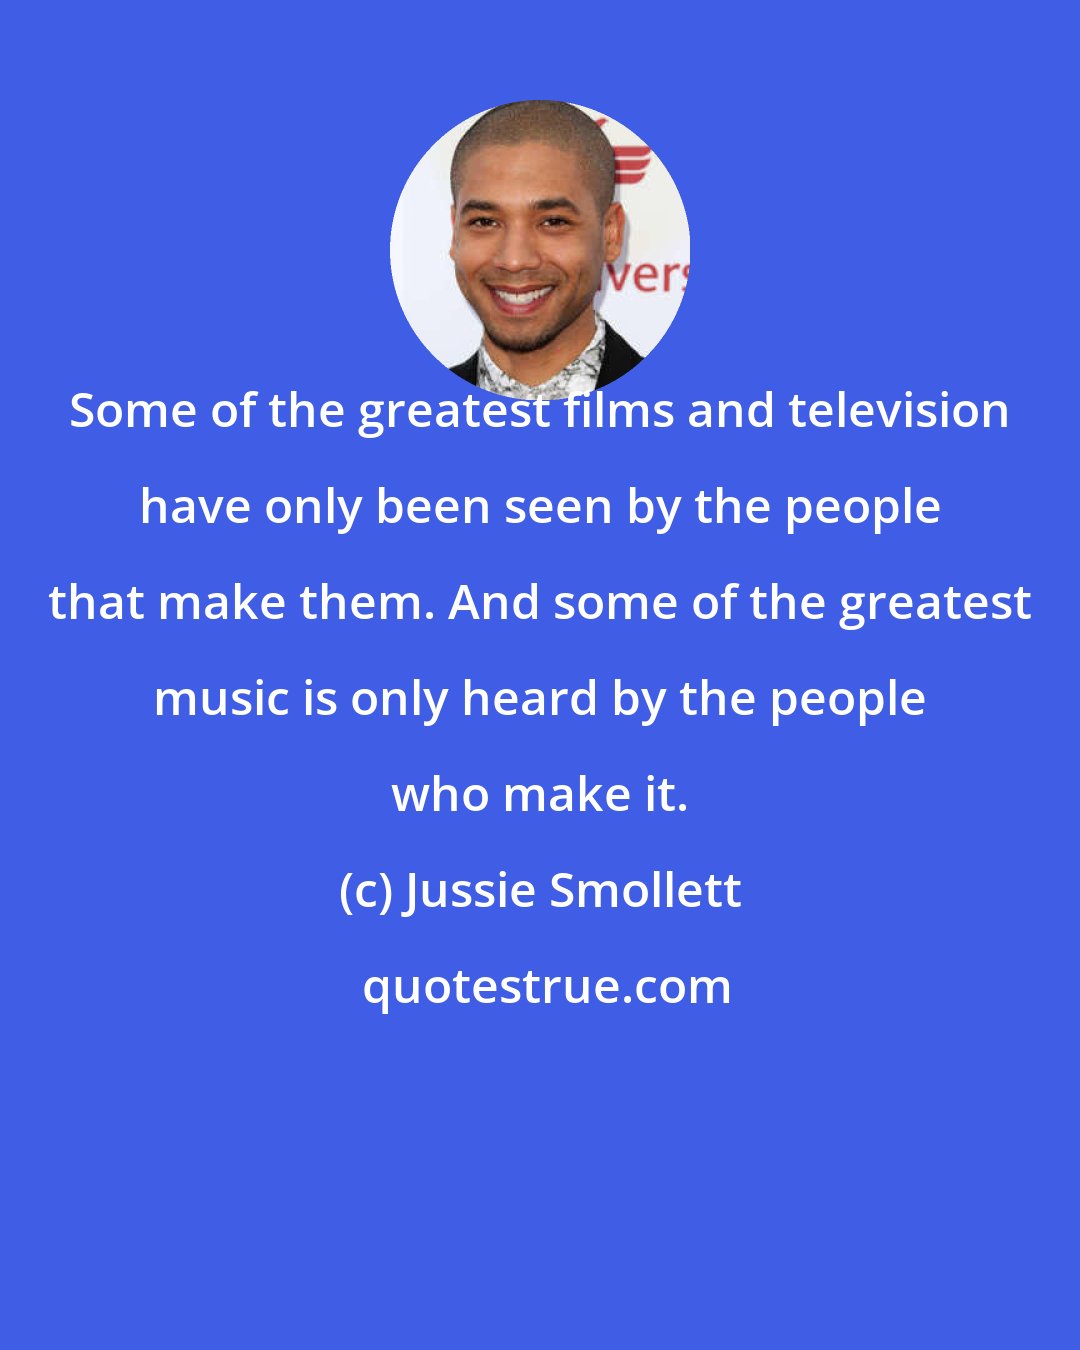 Jussie Smollett: Some of the greatest films and television have only been seen by the people that make them. And some of the greatest music is only heard by the people who make it.